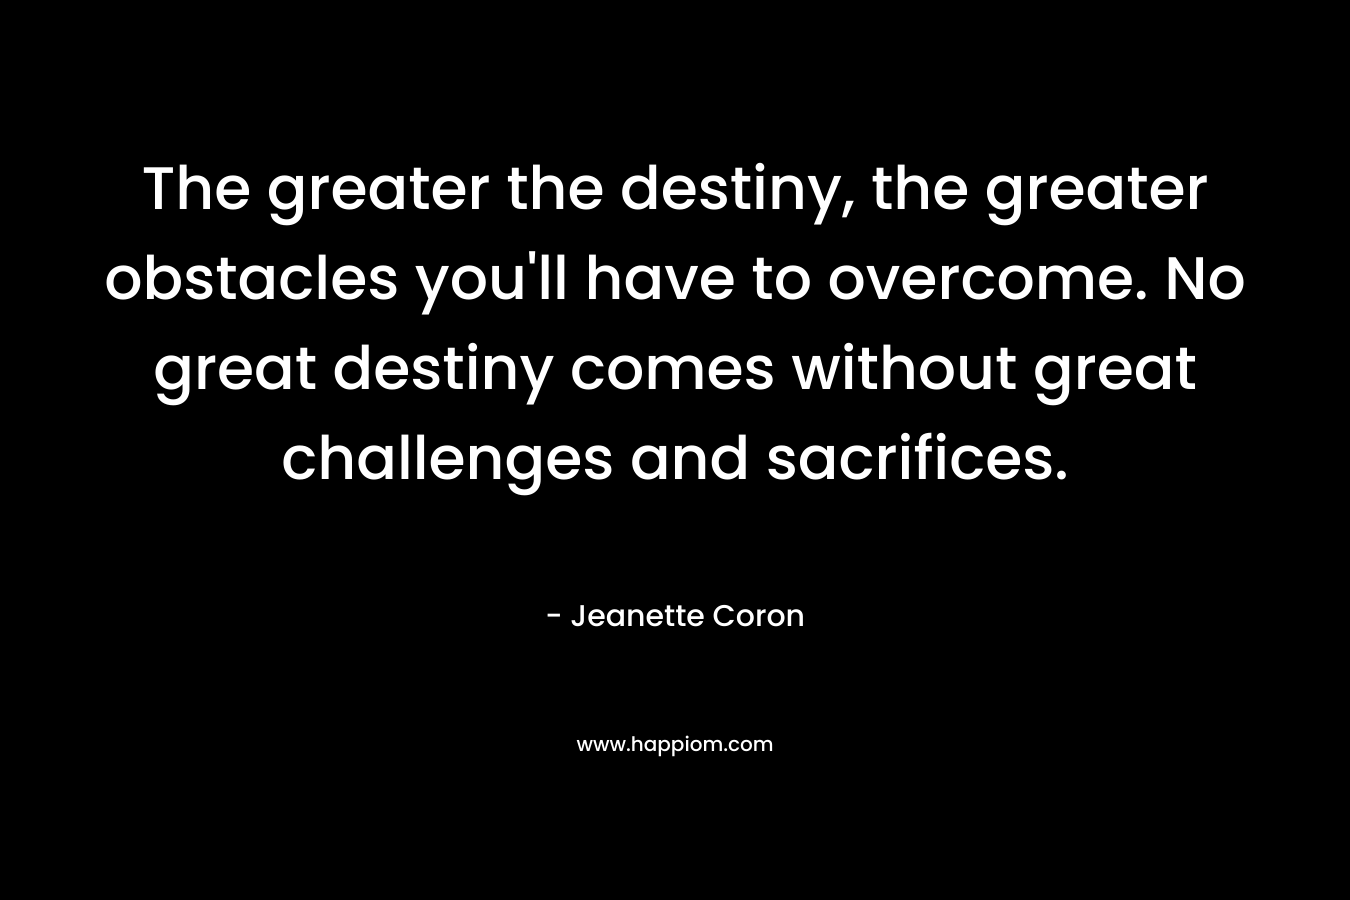 The greater the destiny, the greater obstacles you'll have to overcome. No great destiny comes without great challenges and sacrifices.